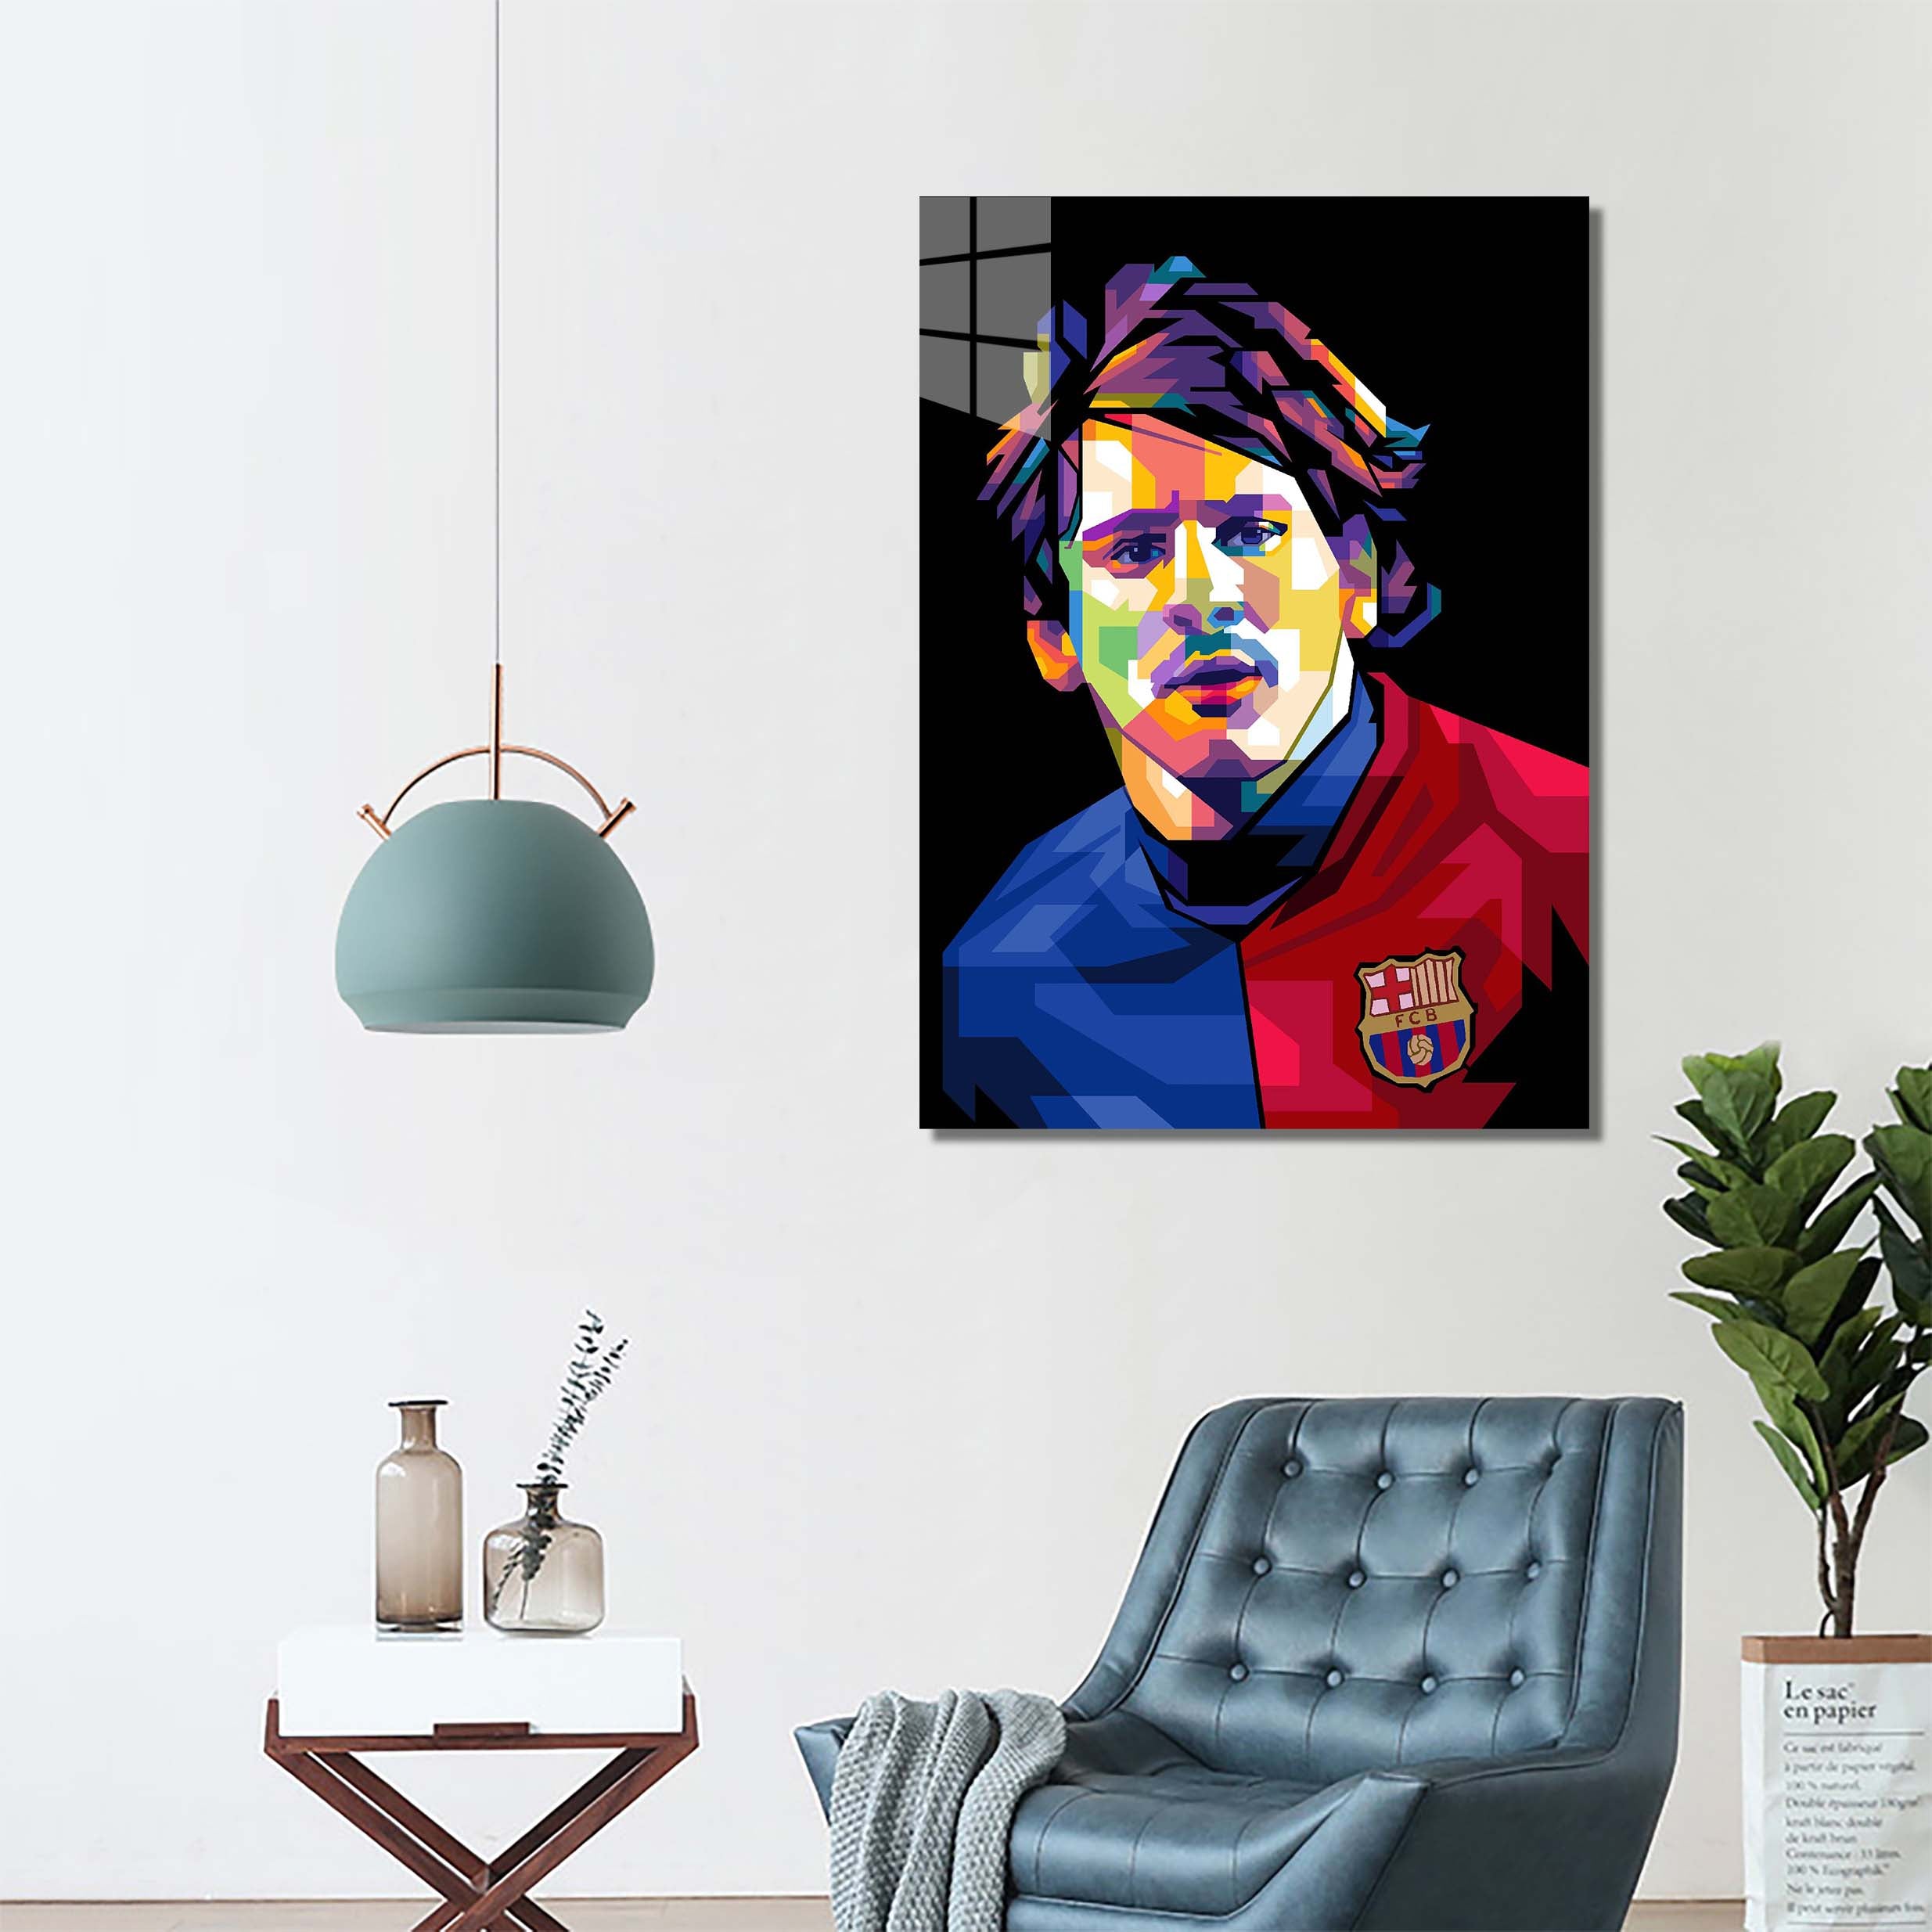 Messi Young-designed by @Agil Topann